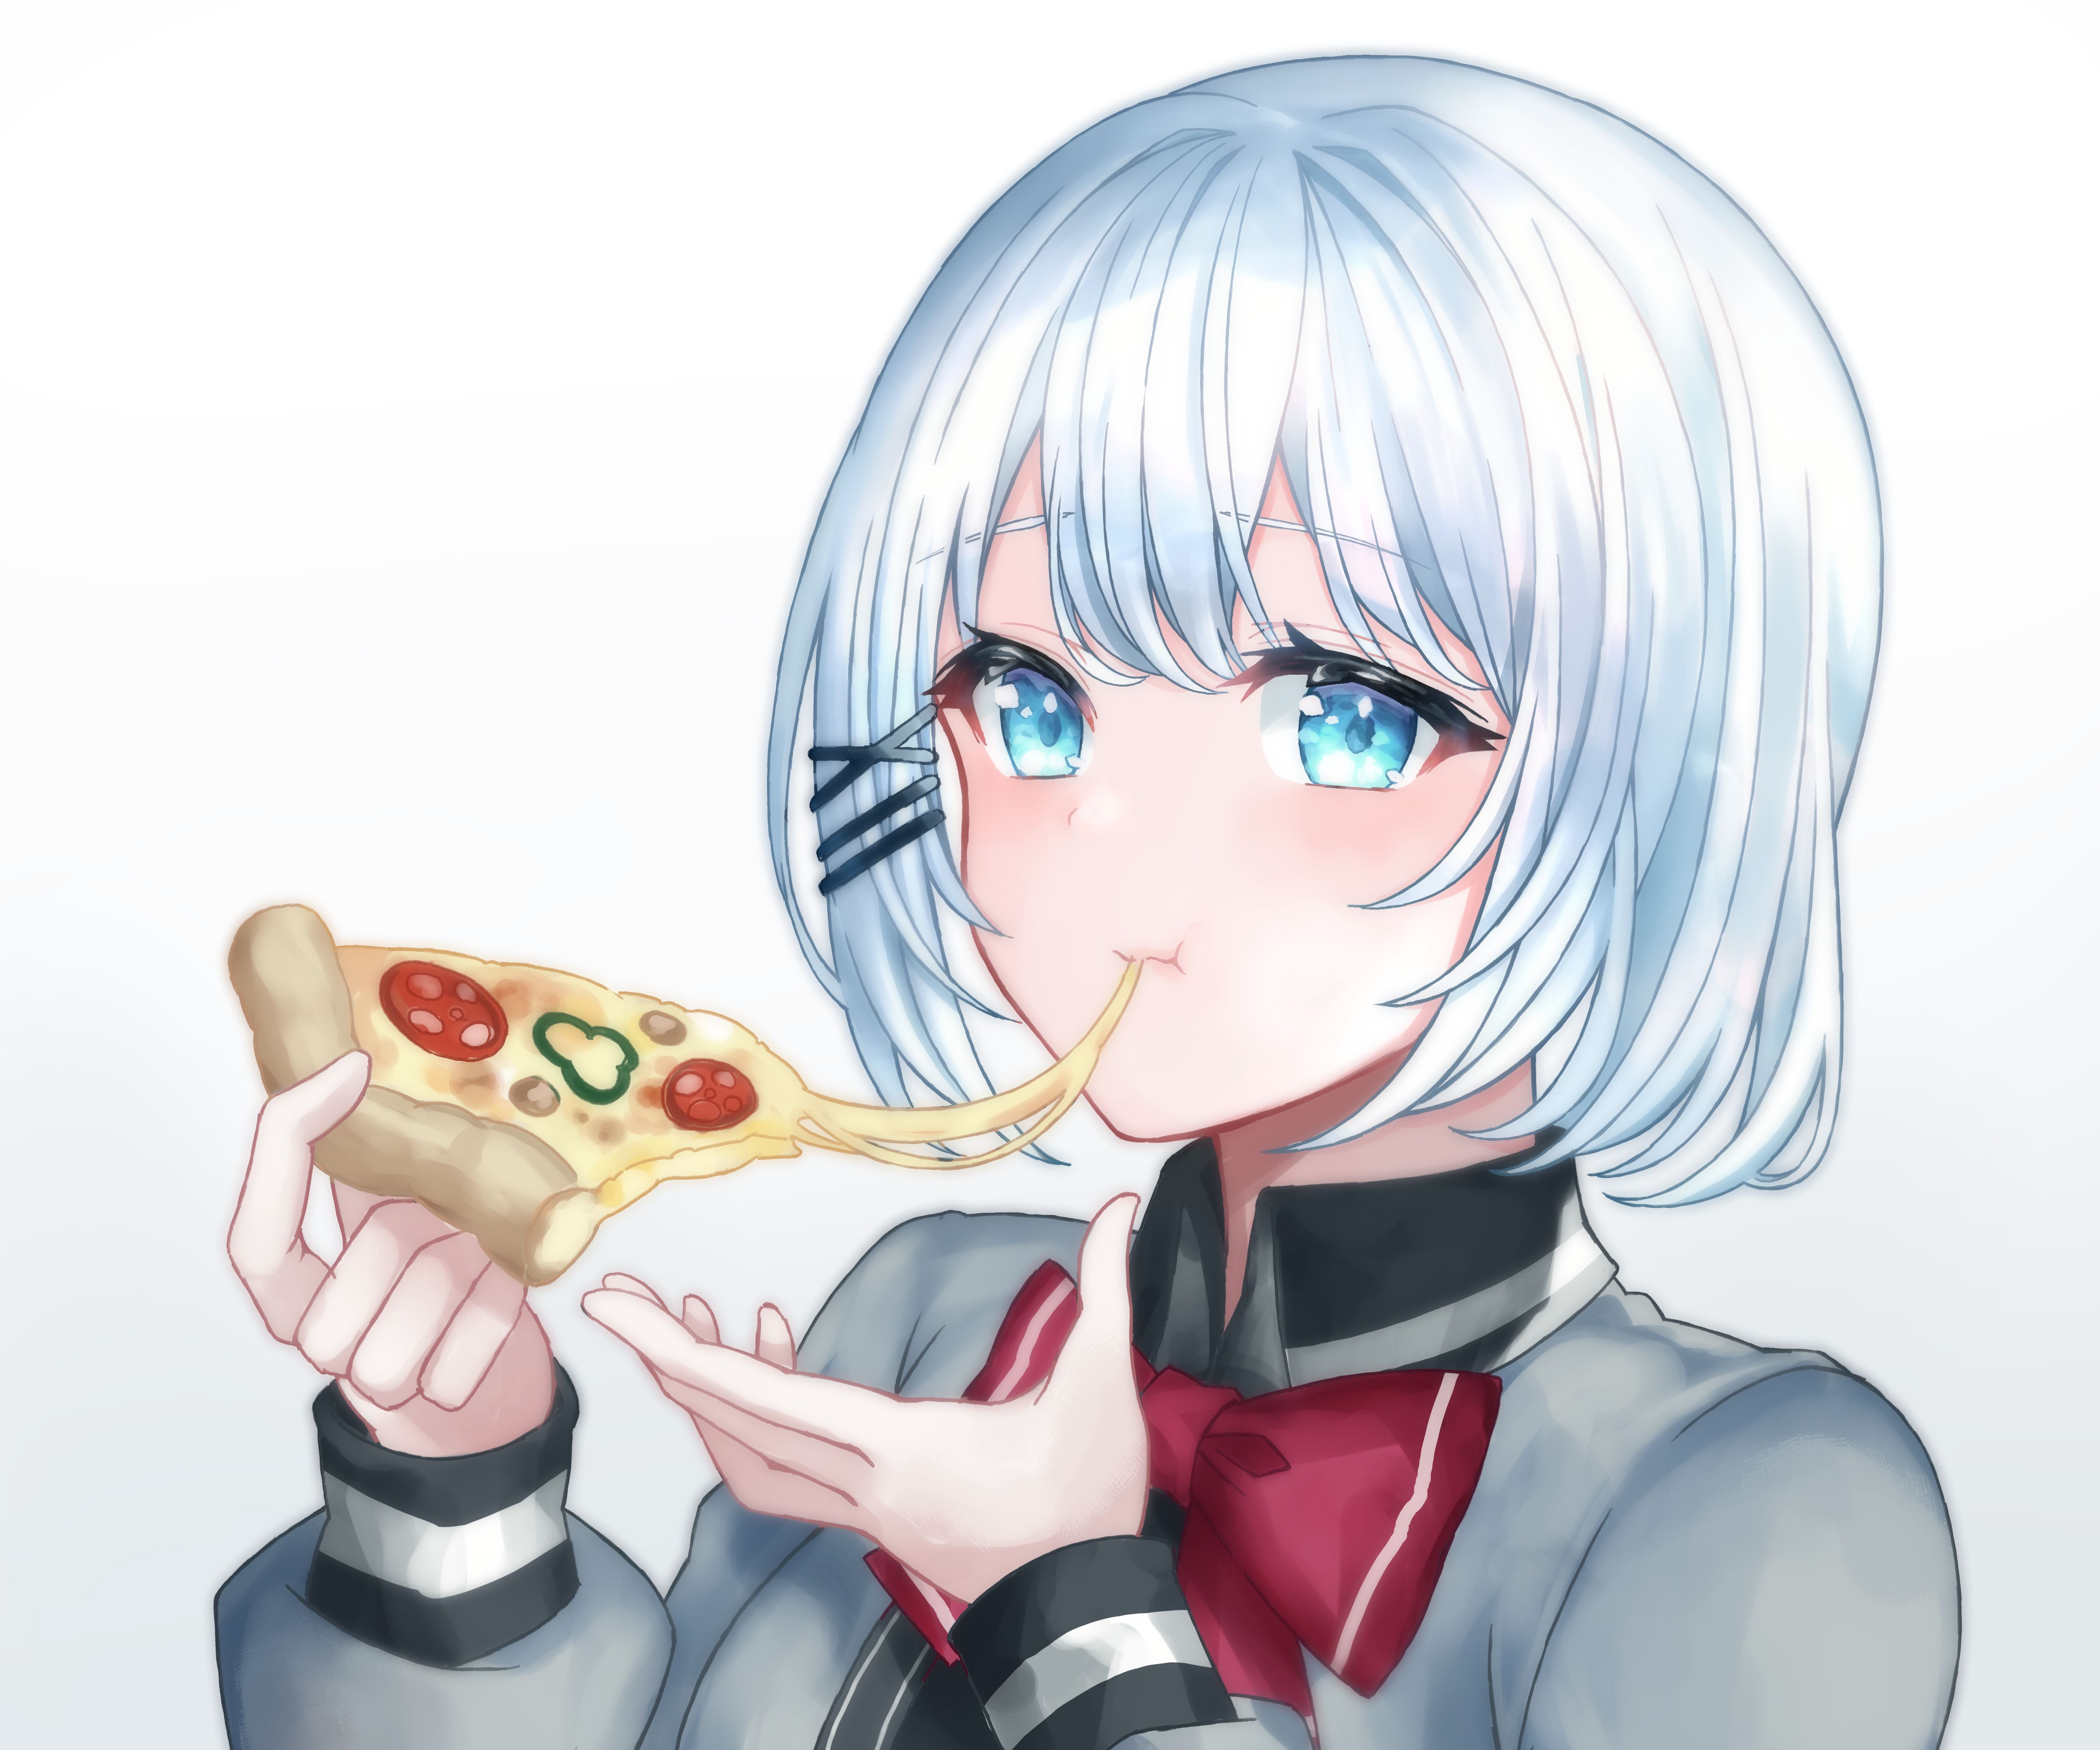 An anime girl eating a slice of pizza, savoring the | Stable Diffusion